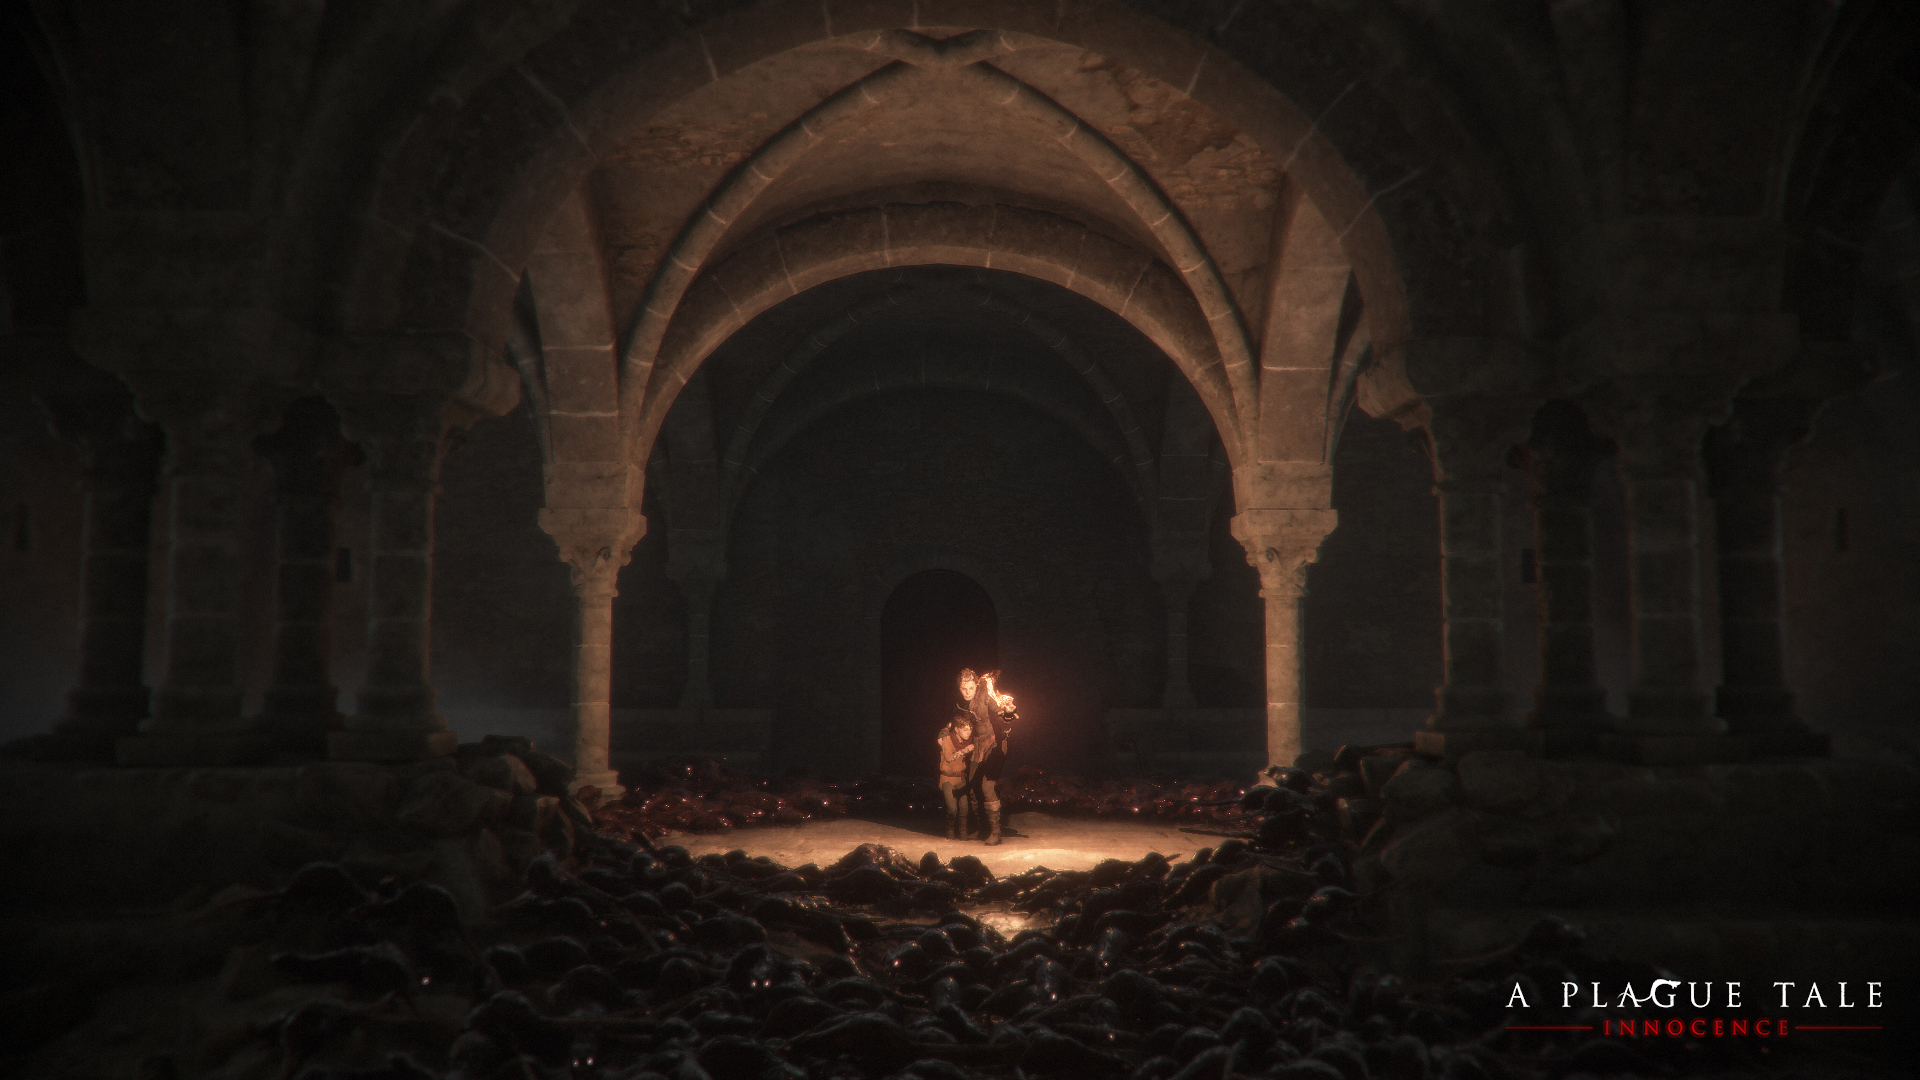 A Plague Tale: Innocence Enhancements on PS4 Pro, Xbox One X, and